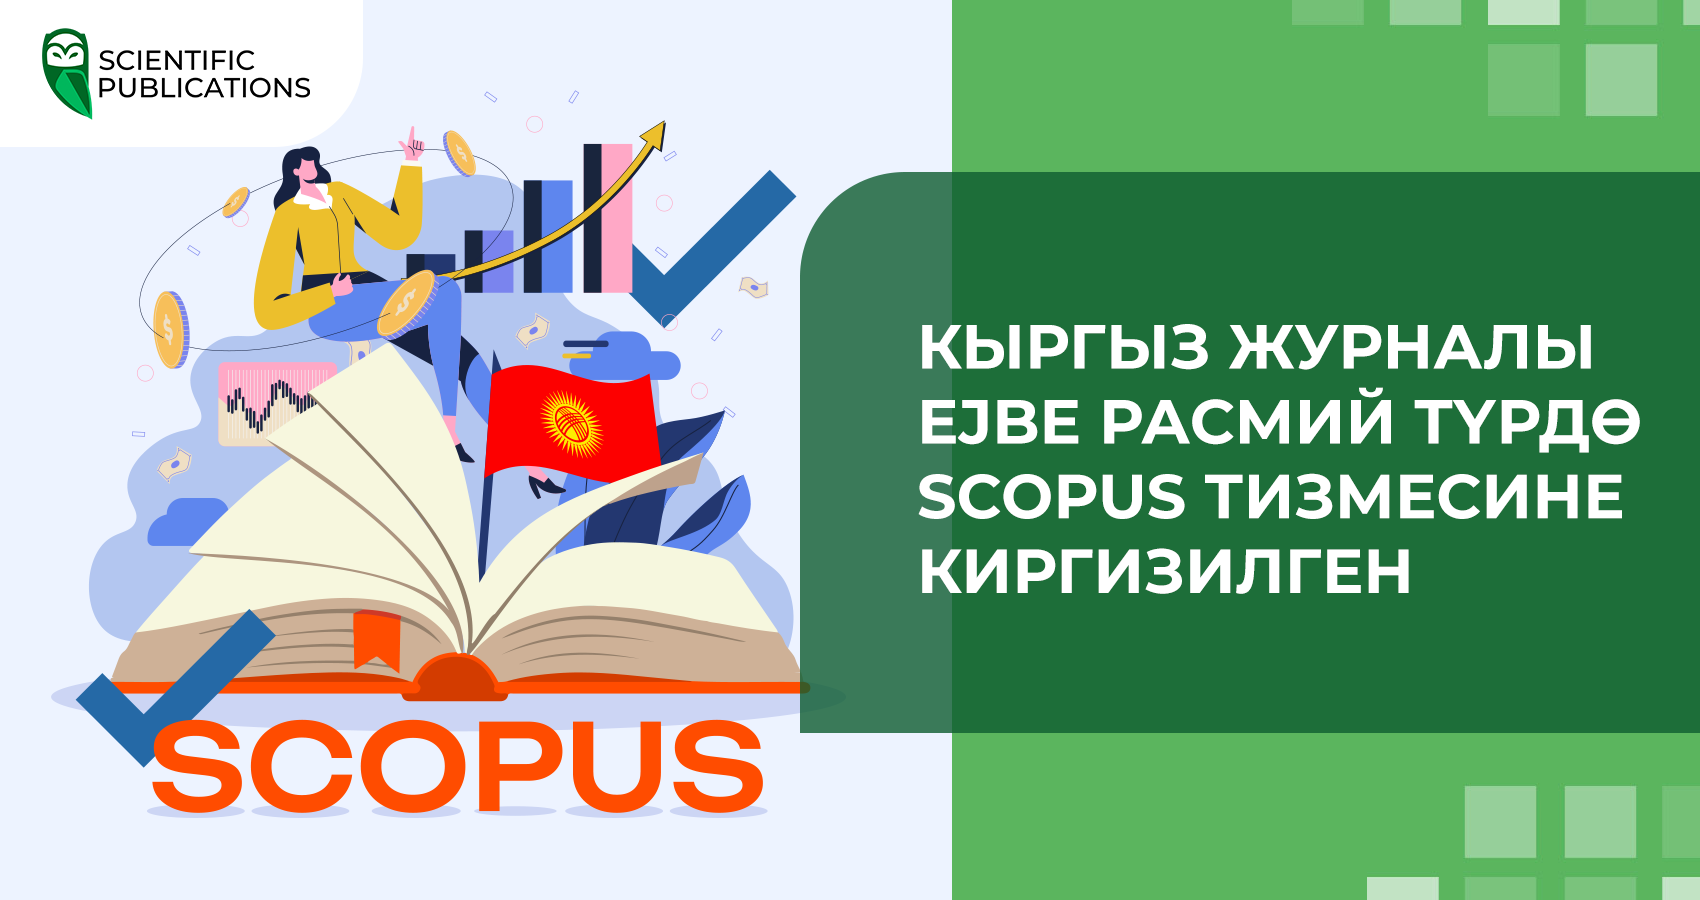 Eurasian Journal of Business and Economics (EJBE)